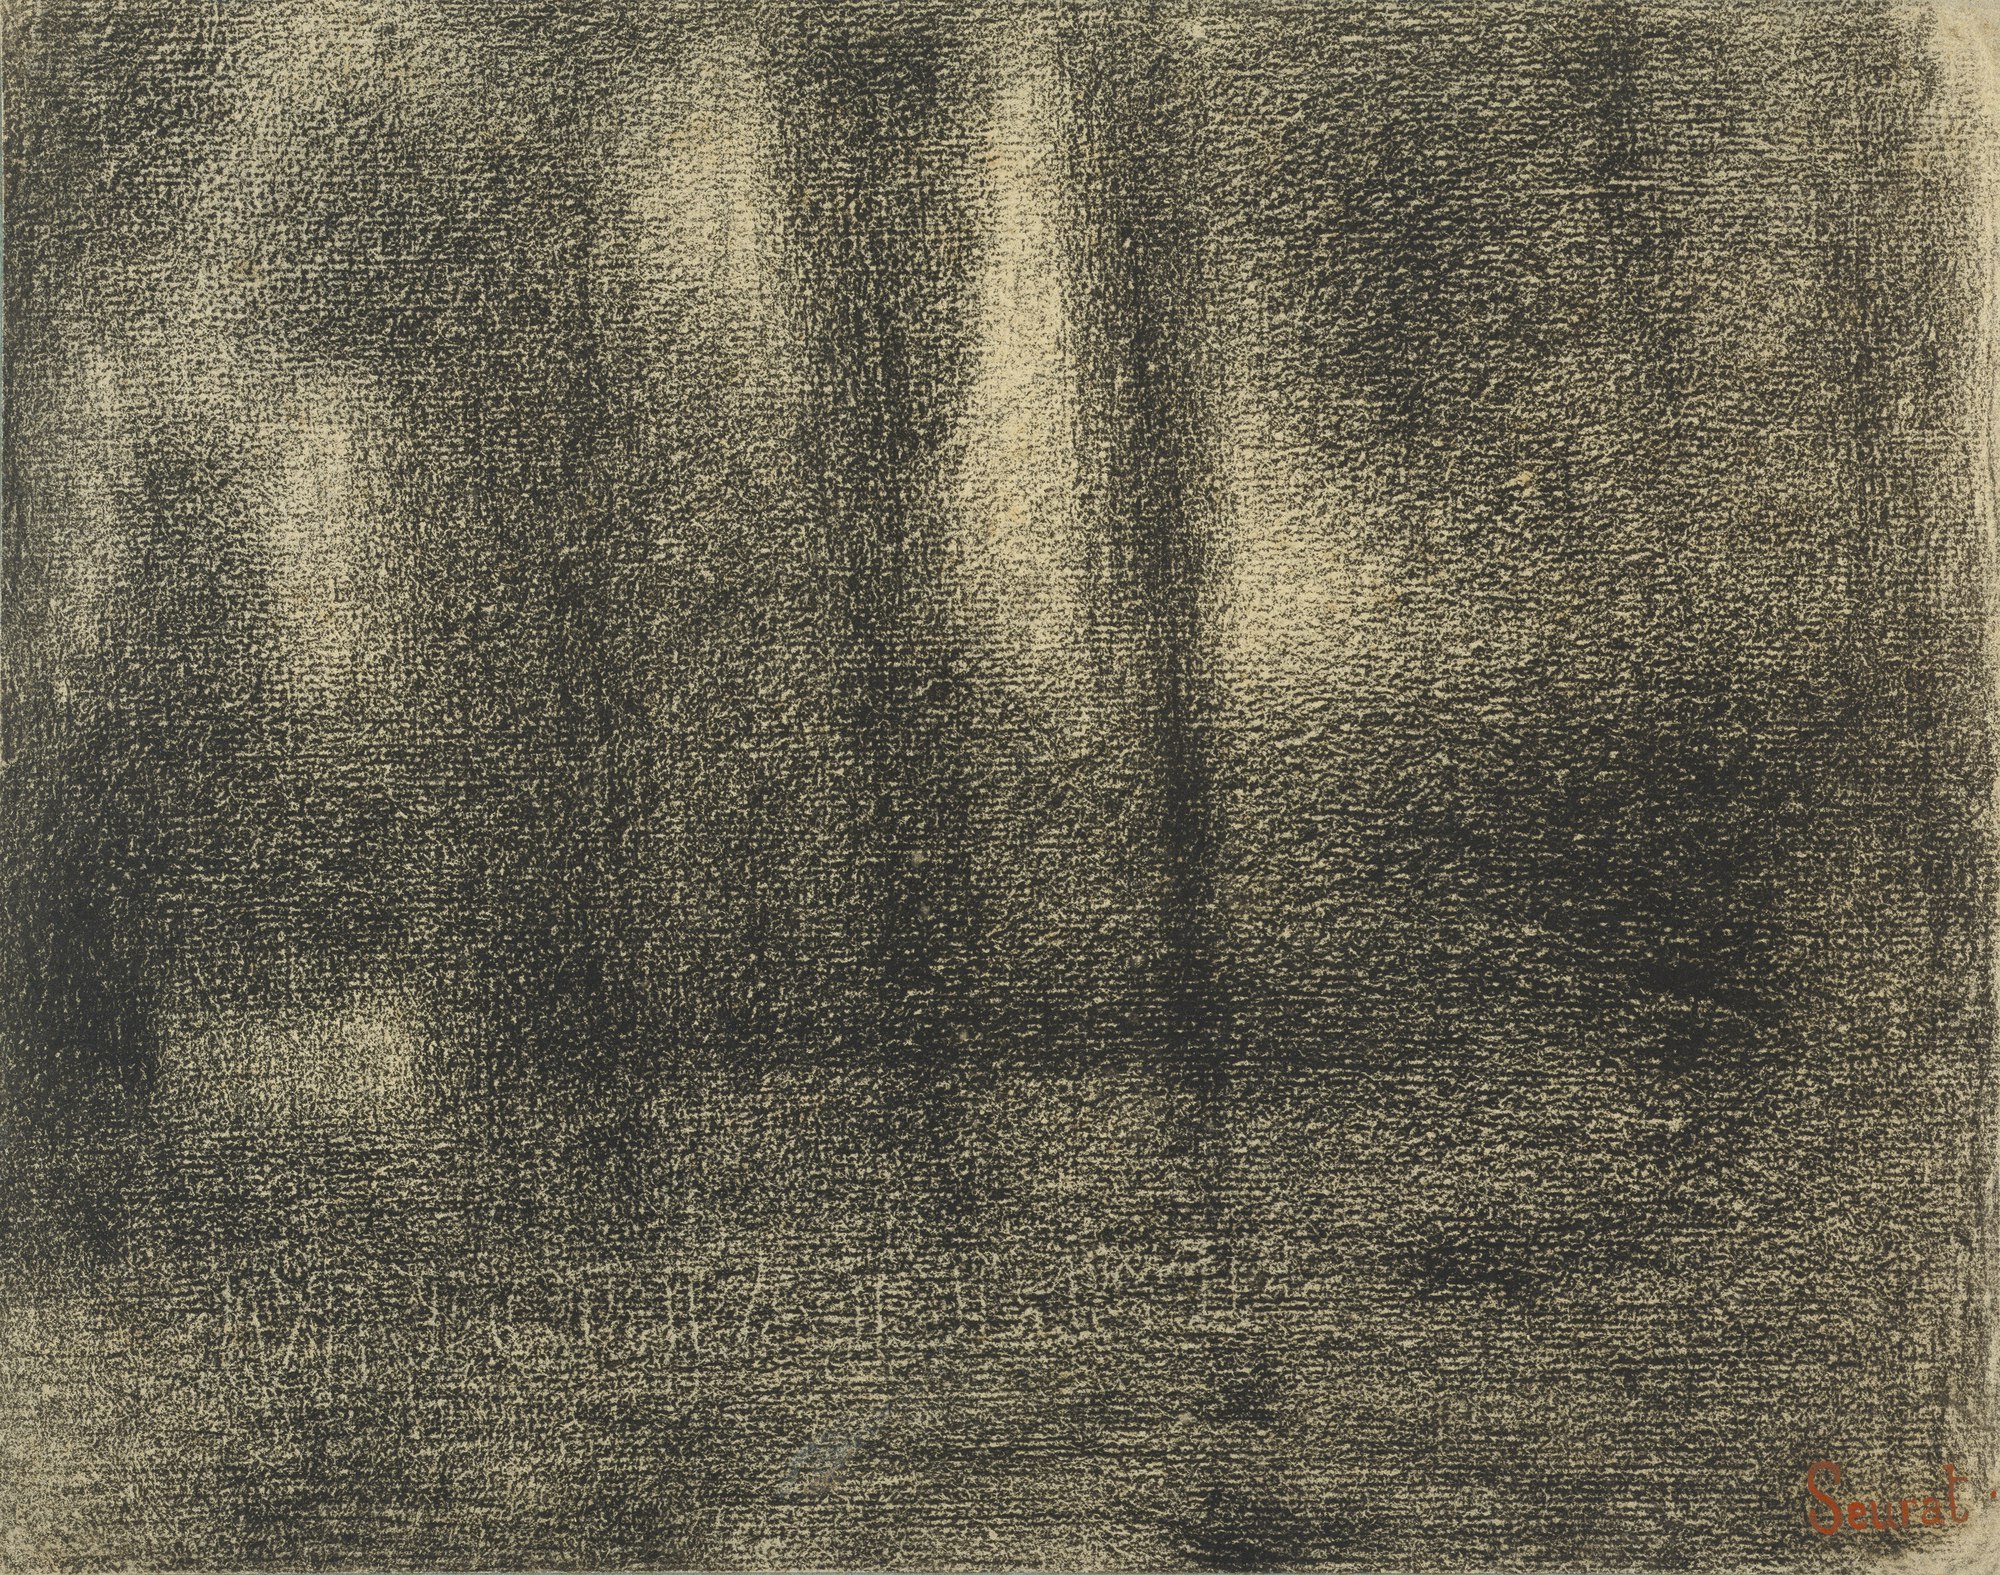 Poplars, about 1883-1884, Georges Seurat. Getty Museum.